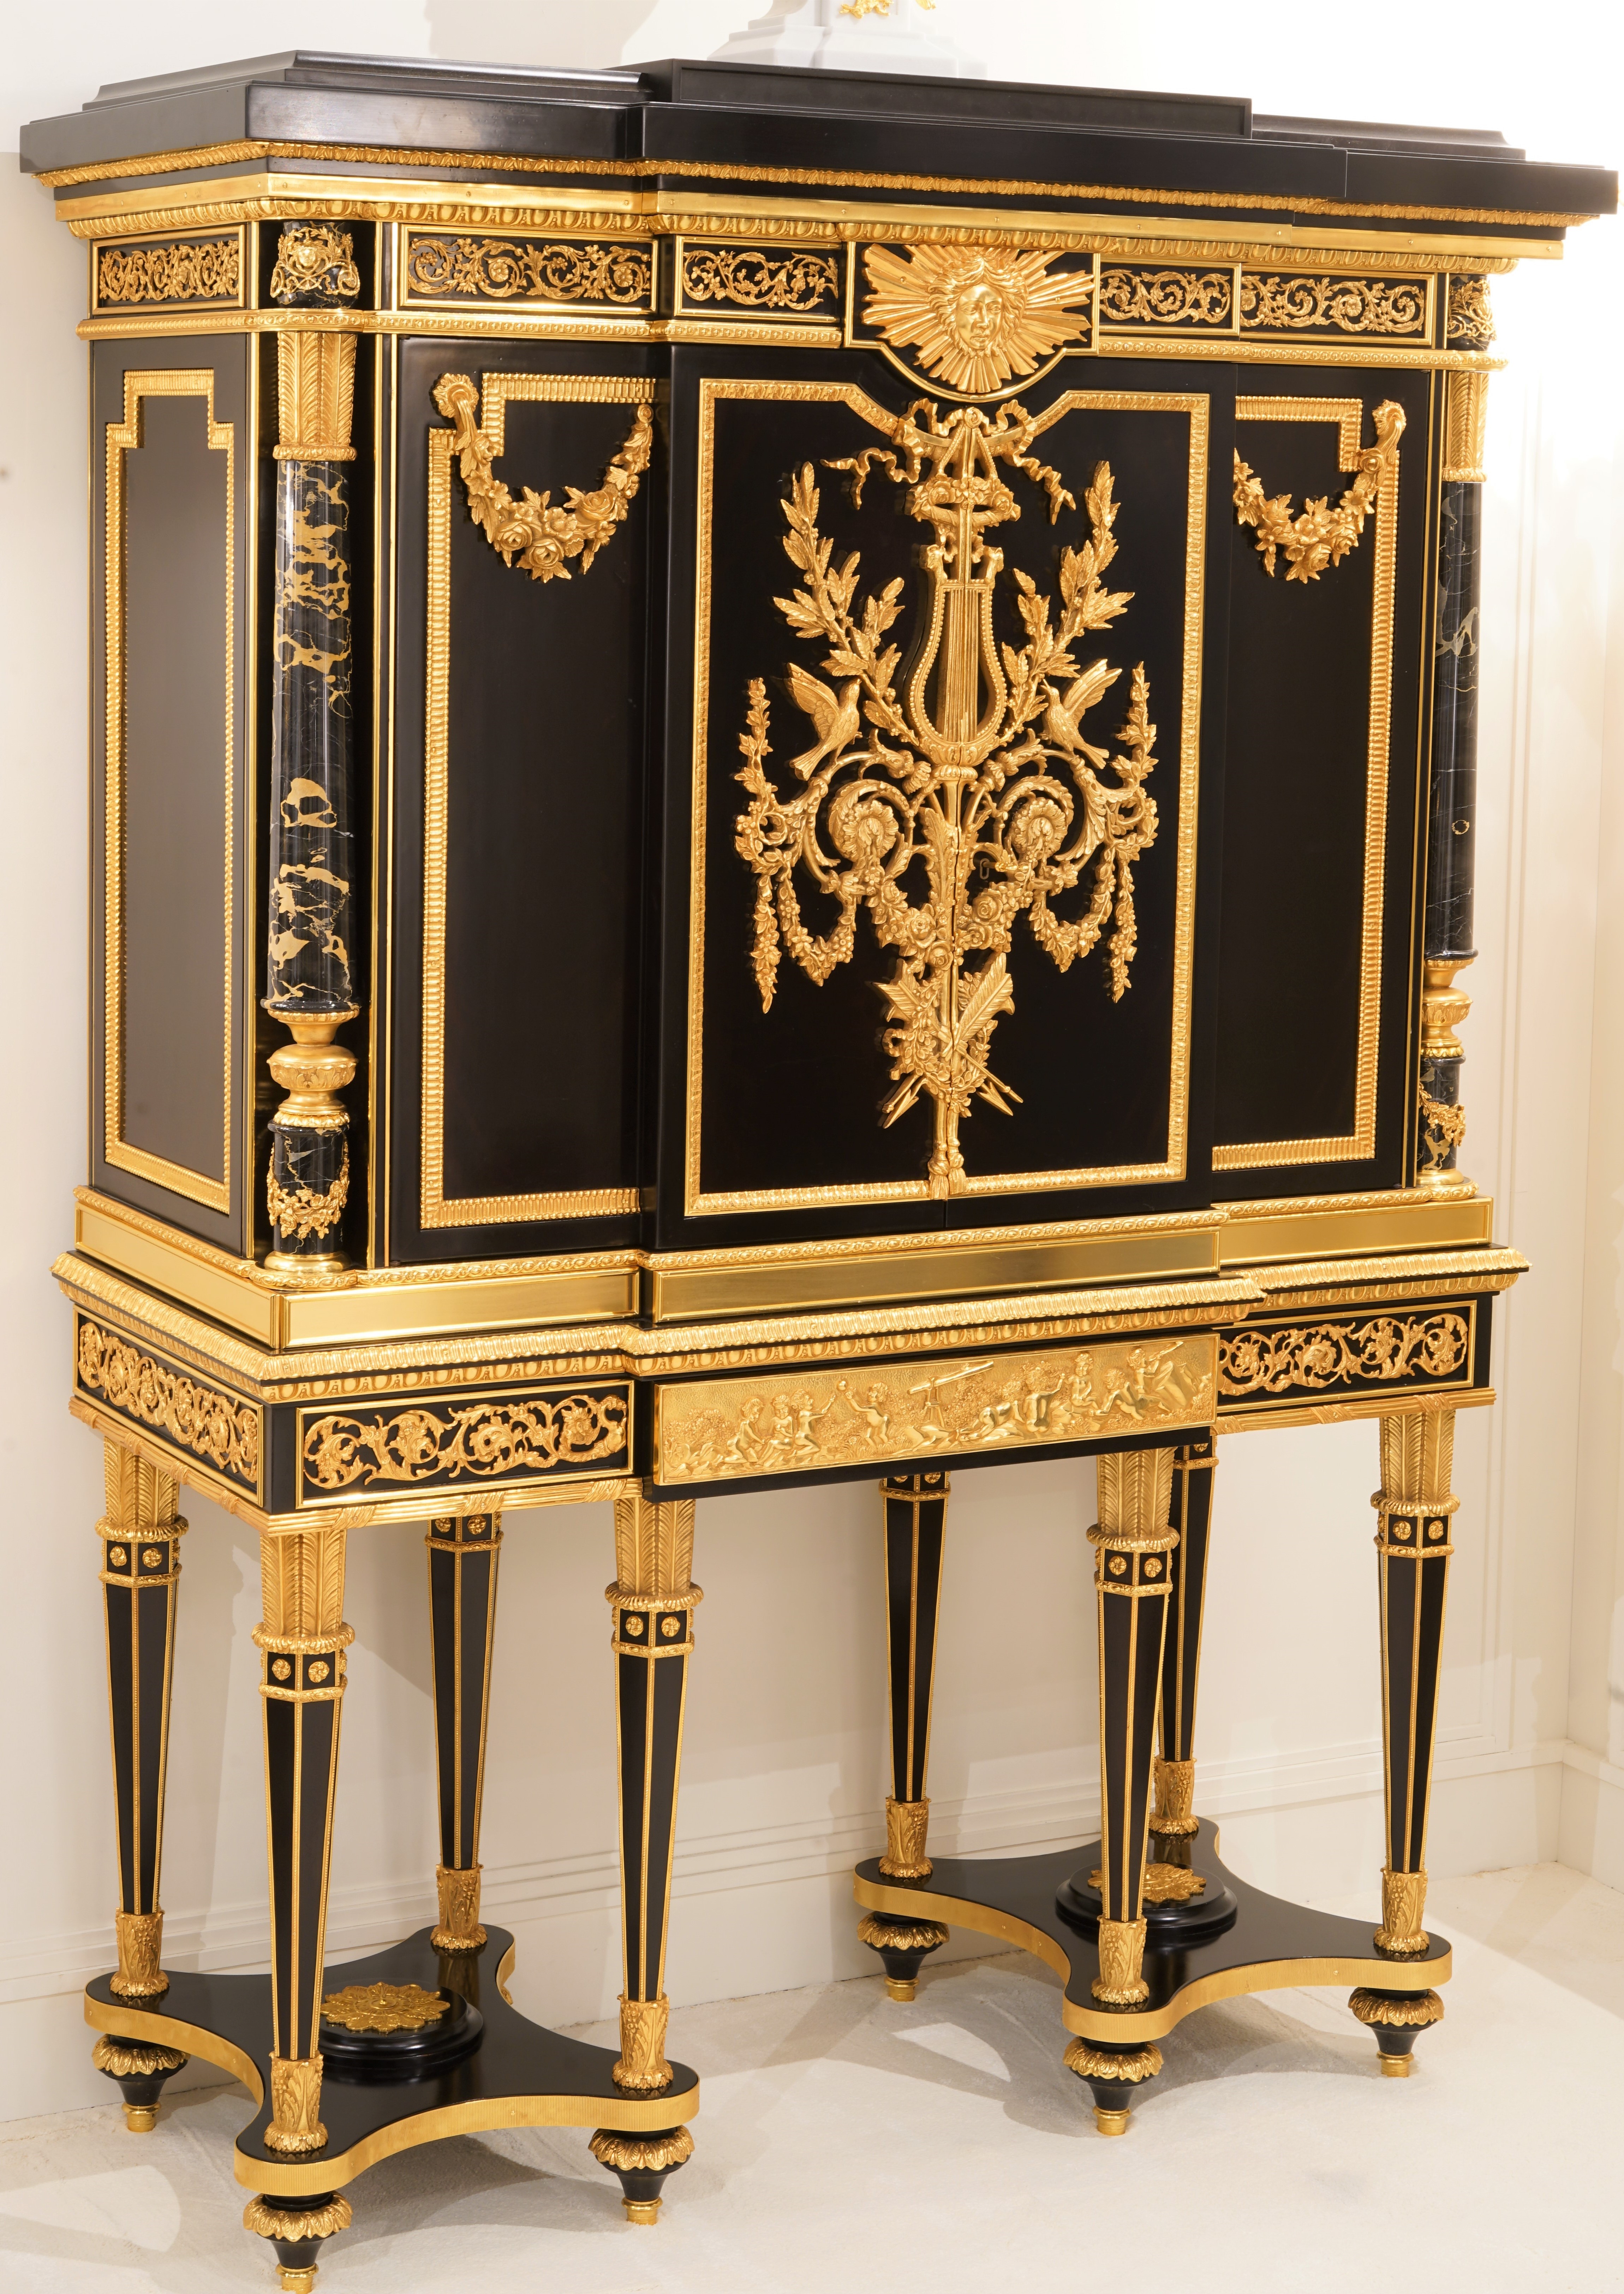 Breakfronts & China Cabinets Gorgeous Shadows of Gold Bar Cabinet from our furniture showpiece collection.